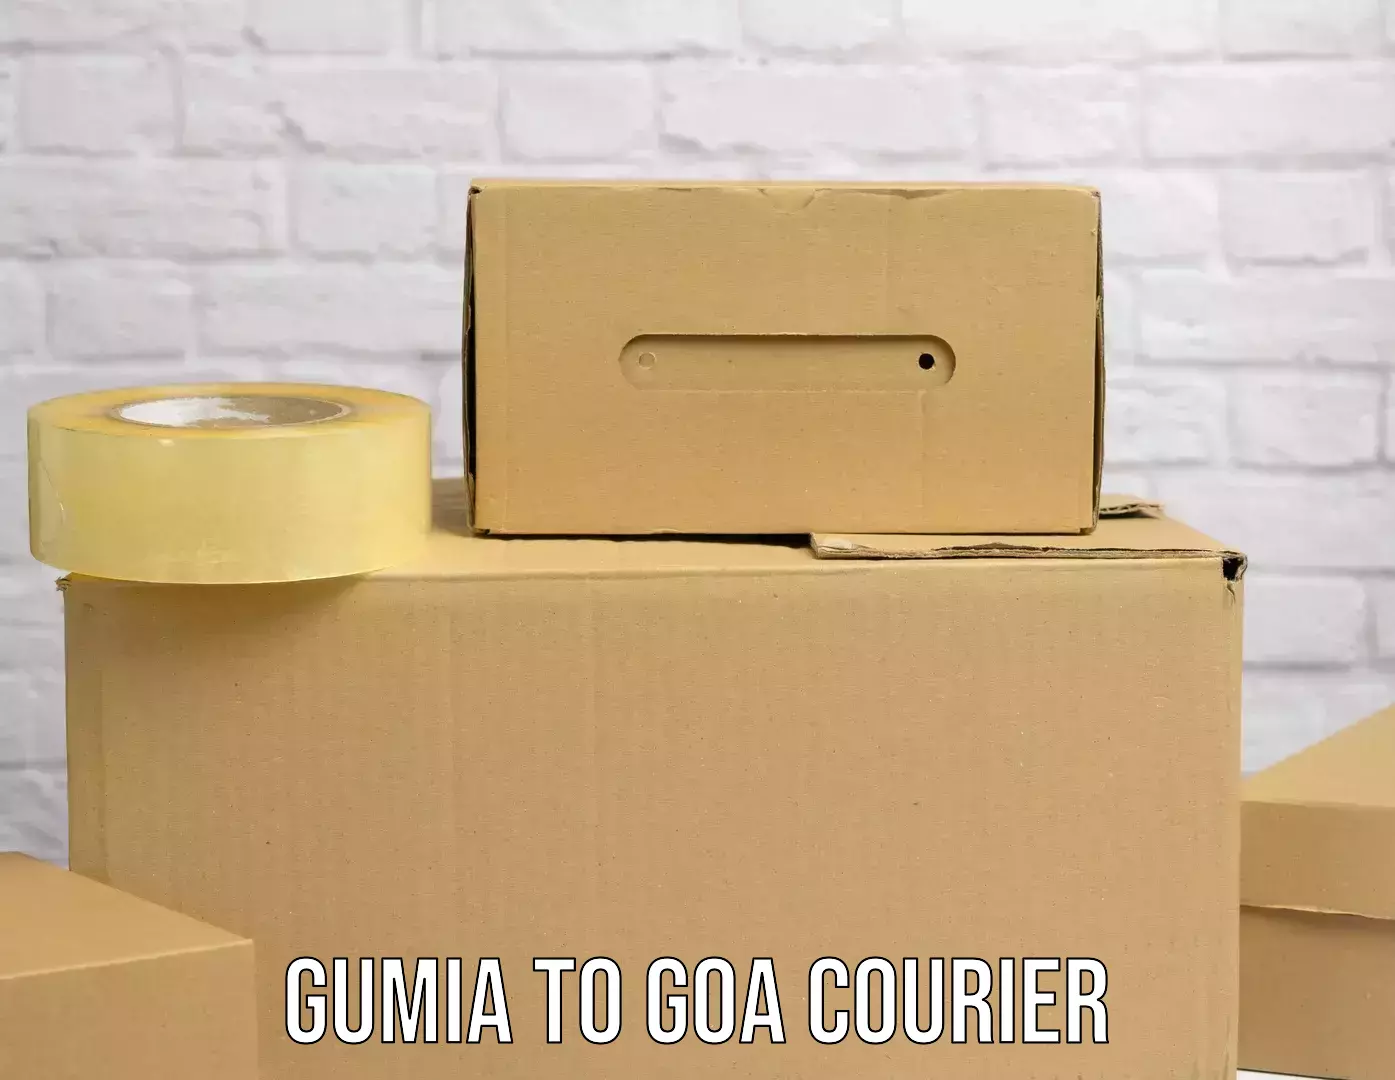 Overnight delivery services Gumia to Goa